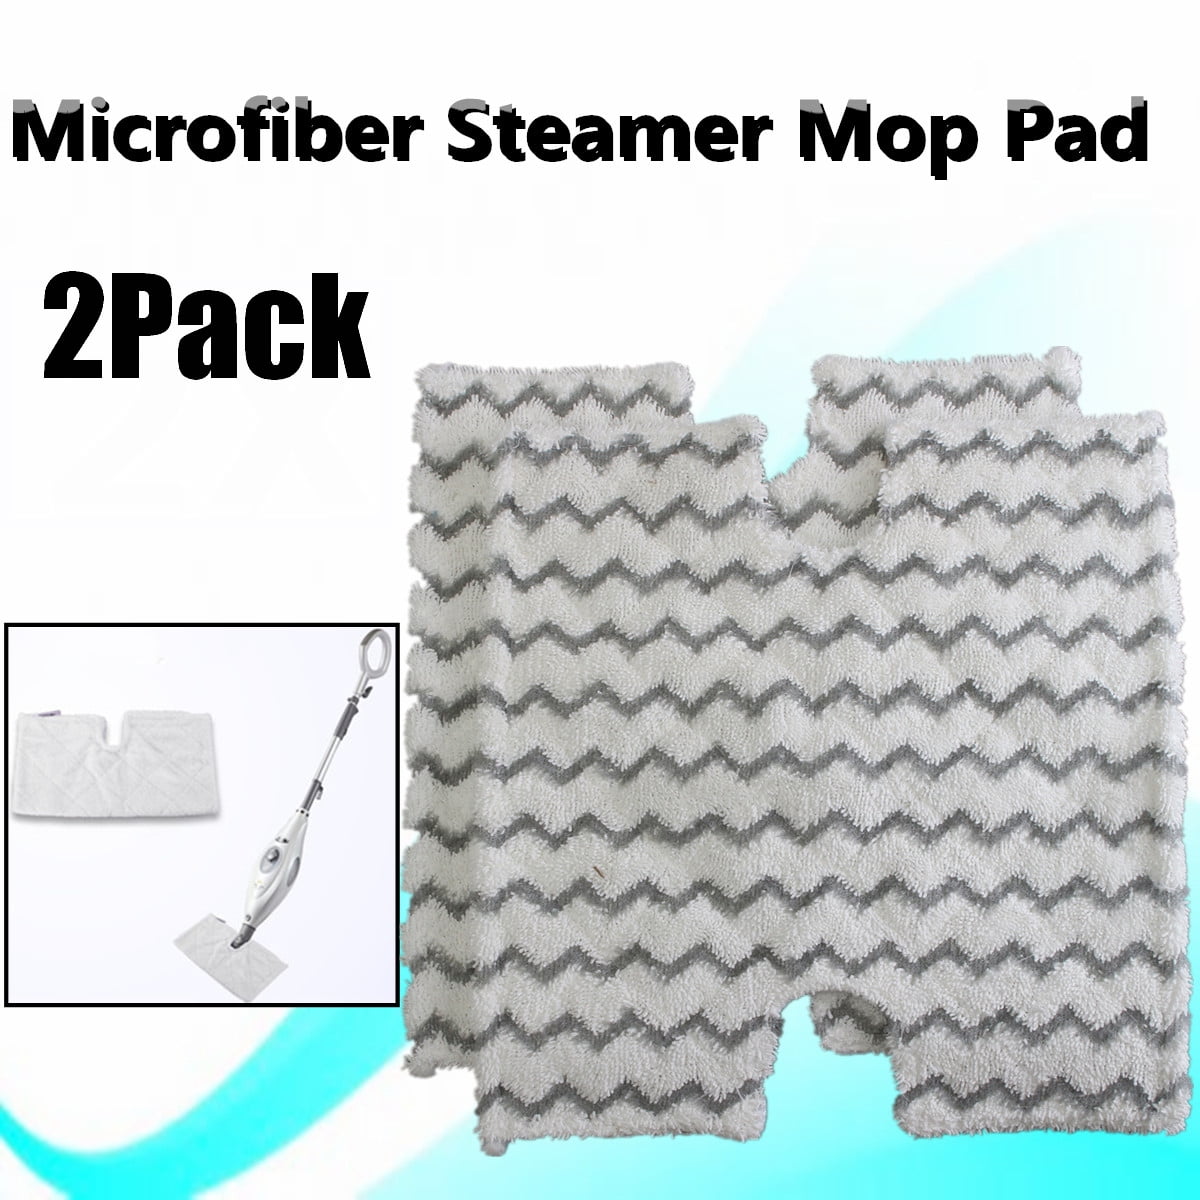 Eshoppercity Replacement Pads for Shark Genius Touch Free Steam Mop Washable Lift Away S6001 S6002 S6003 3973 S5001 S5002 1